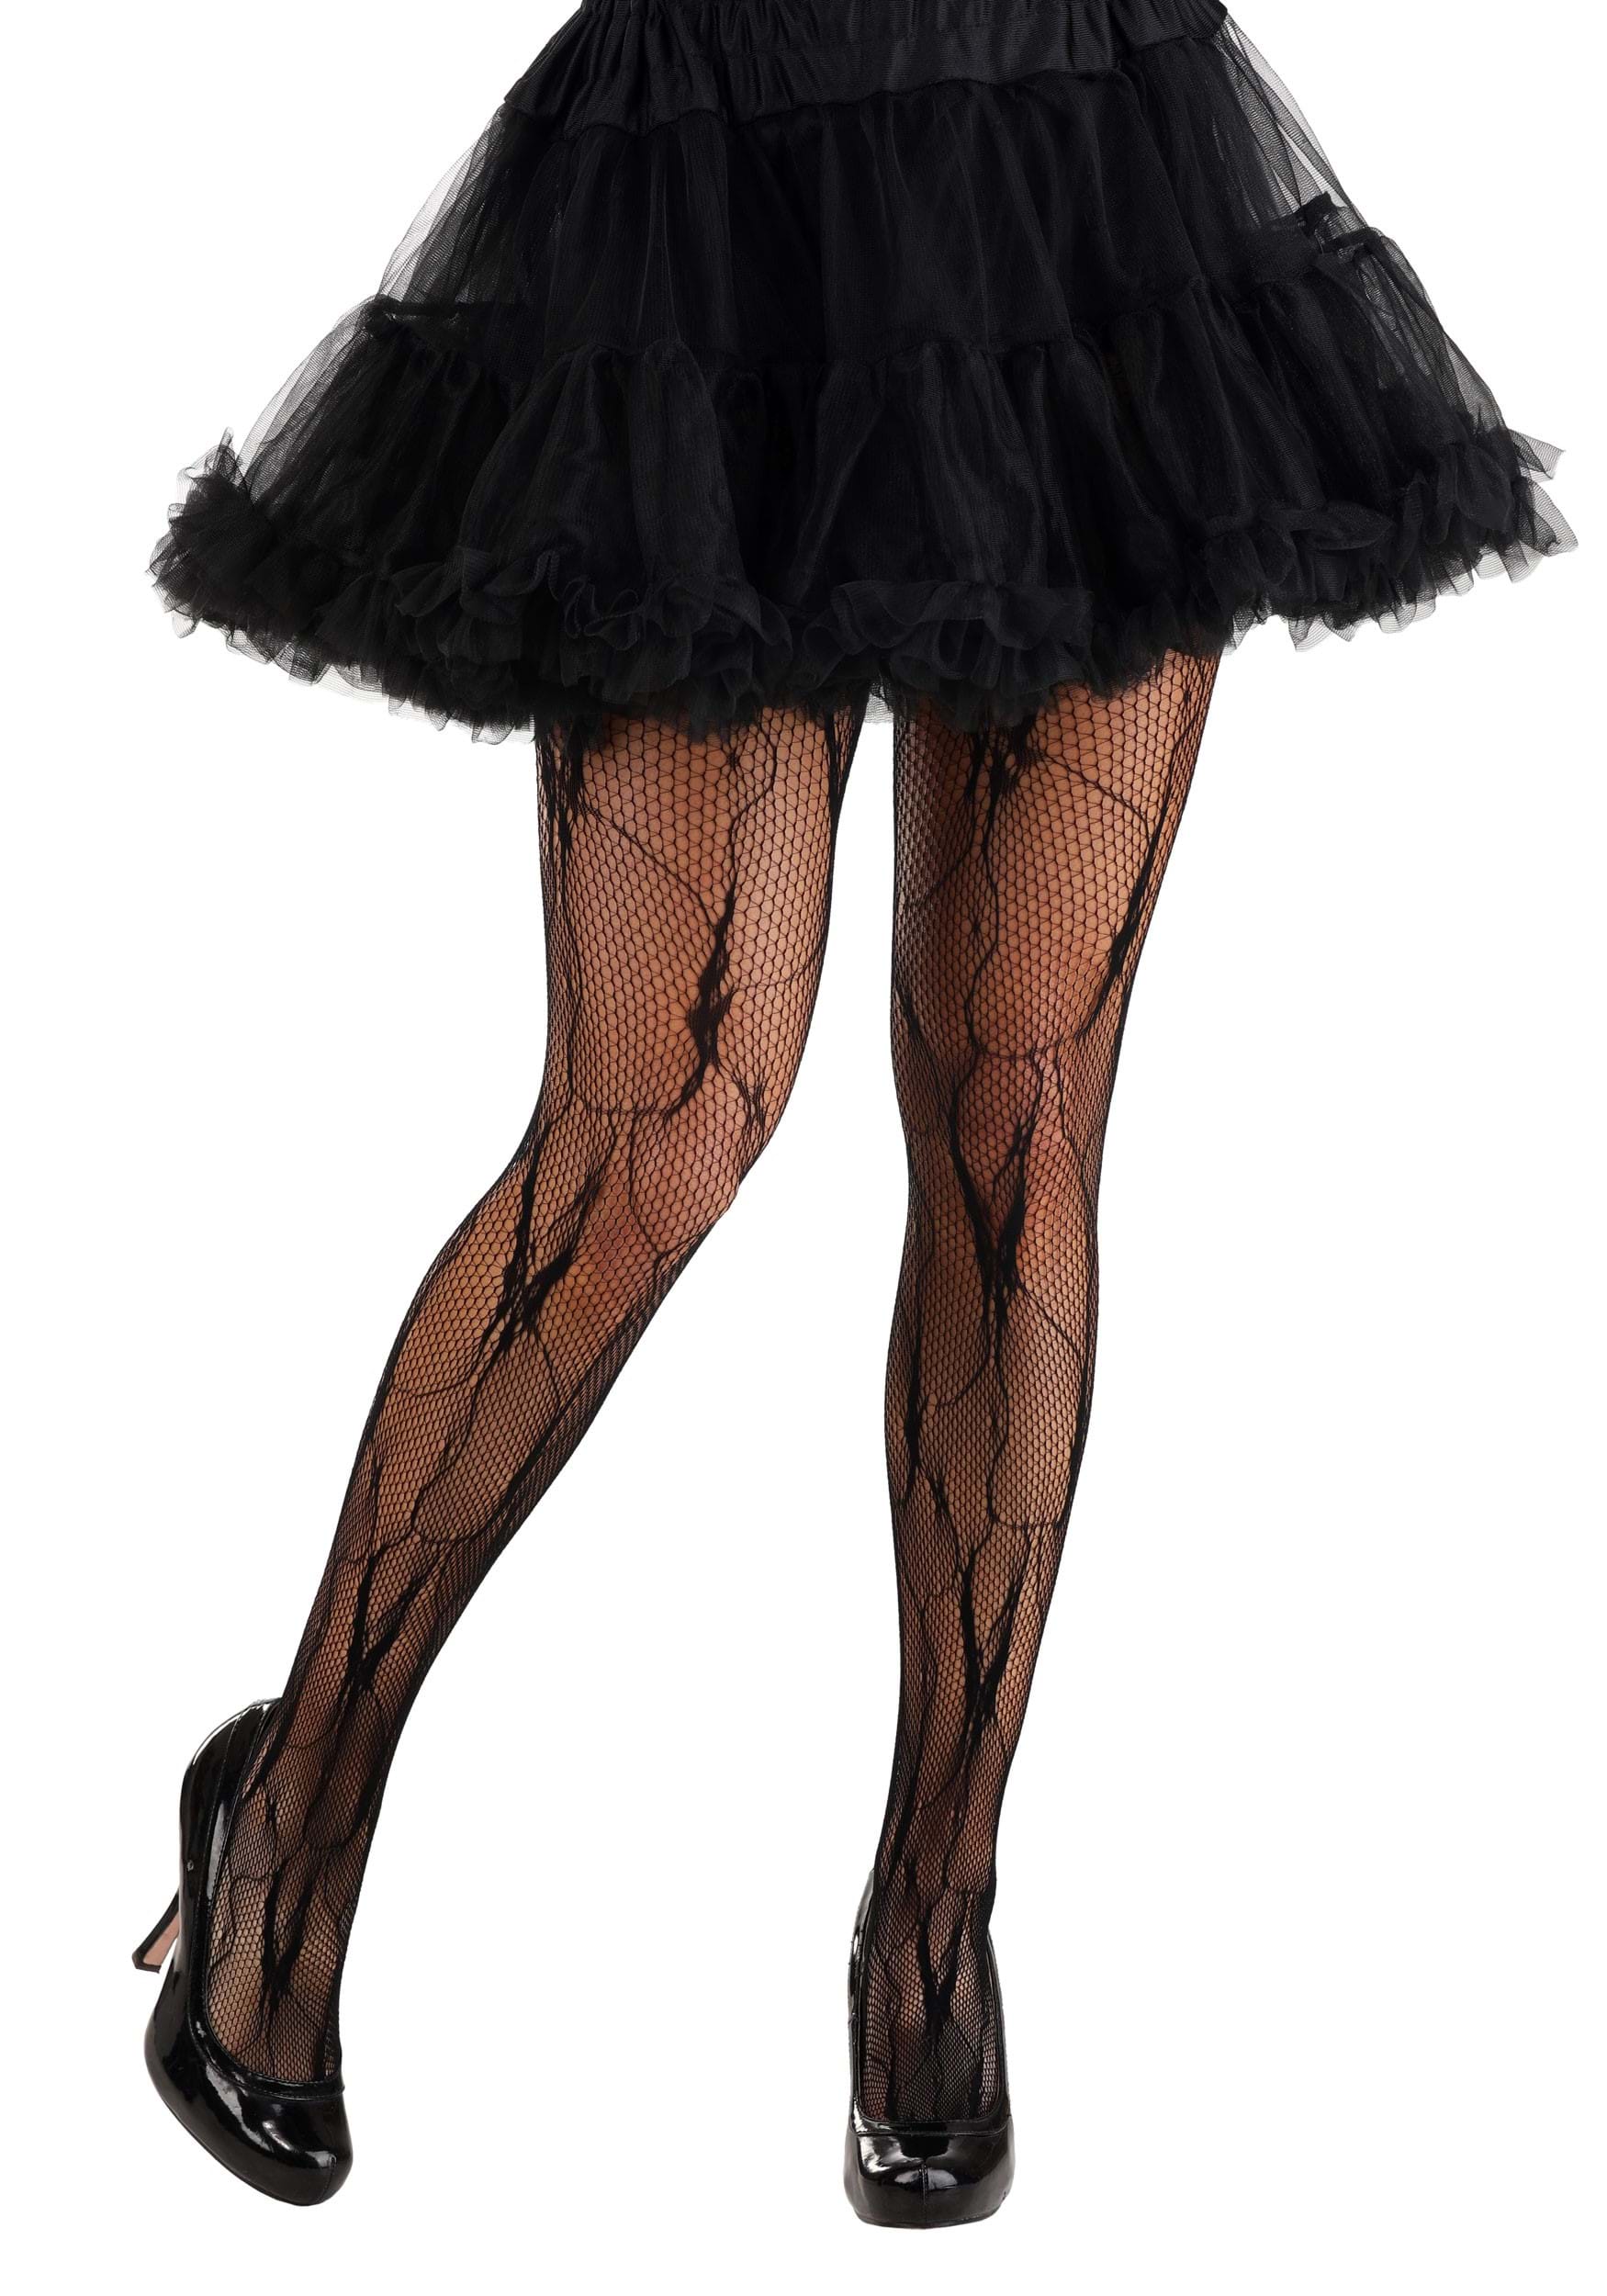 Tights for a perfect Witch Halloween Costume - UK Tights Blog